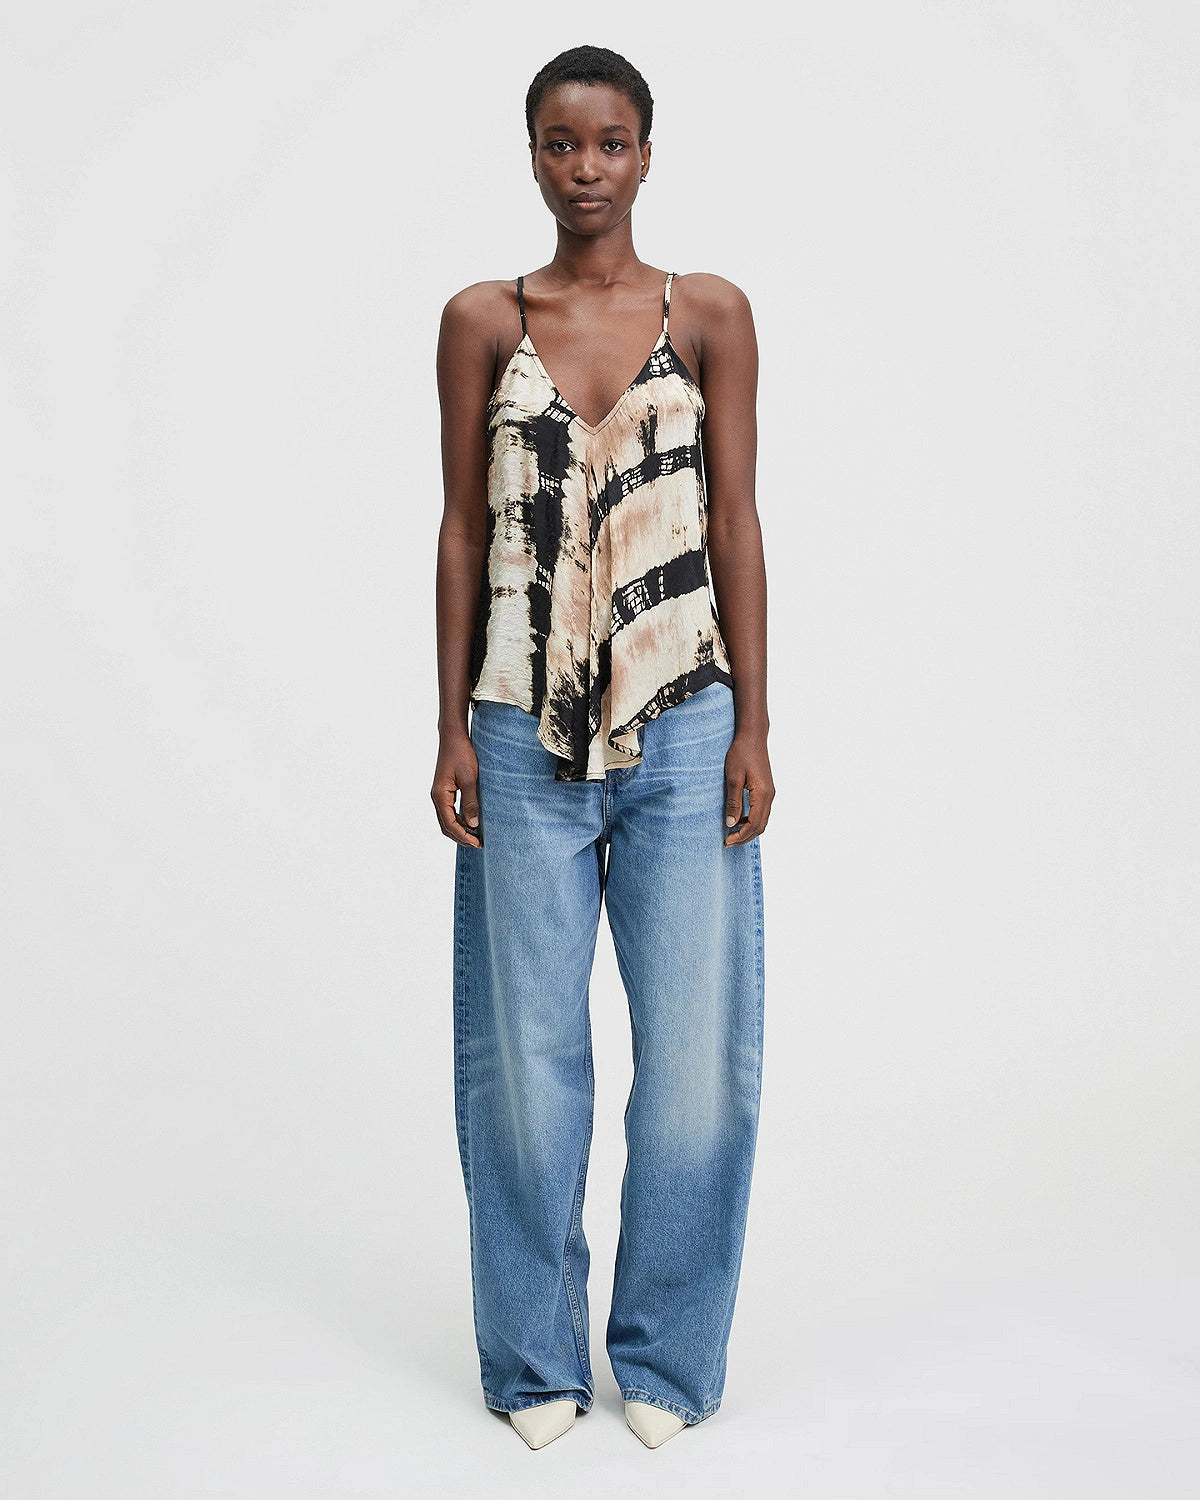 Camisole top with adjustable straps in jacquard viscose with a tie dye effect